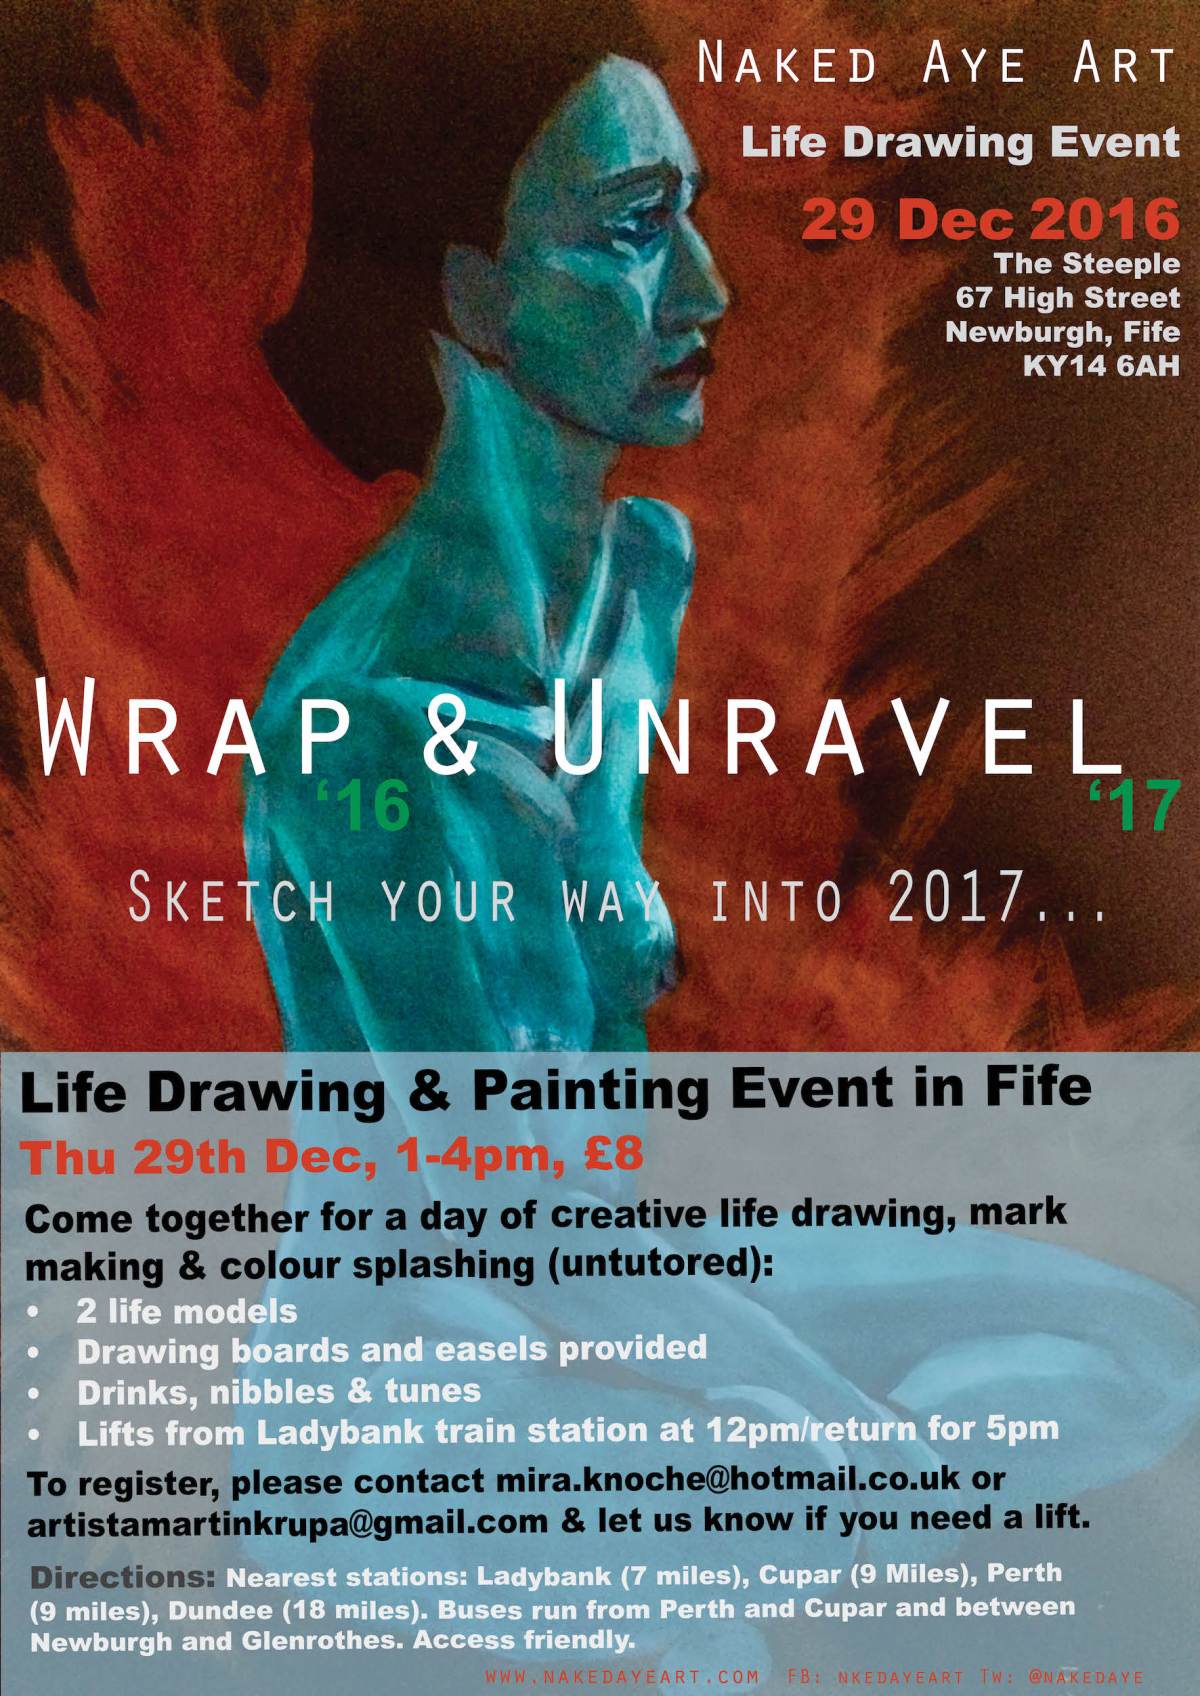 Wrap & Unravel Life-Drawing Event in Fife